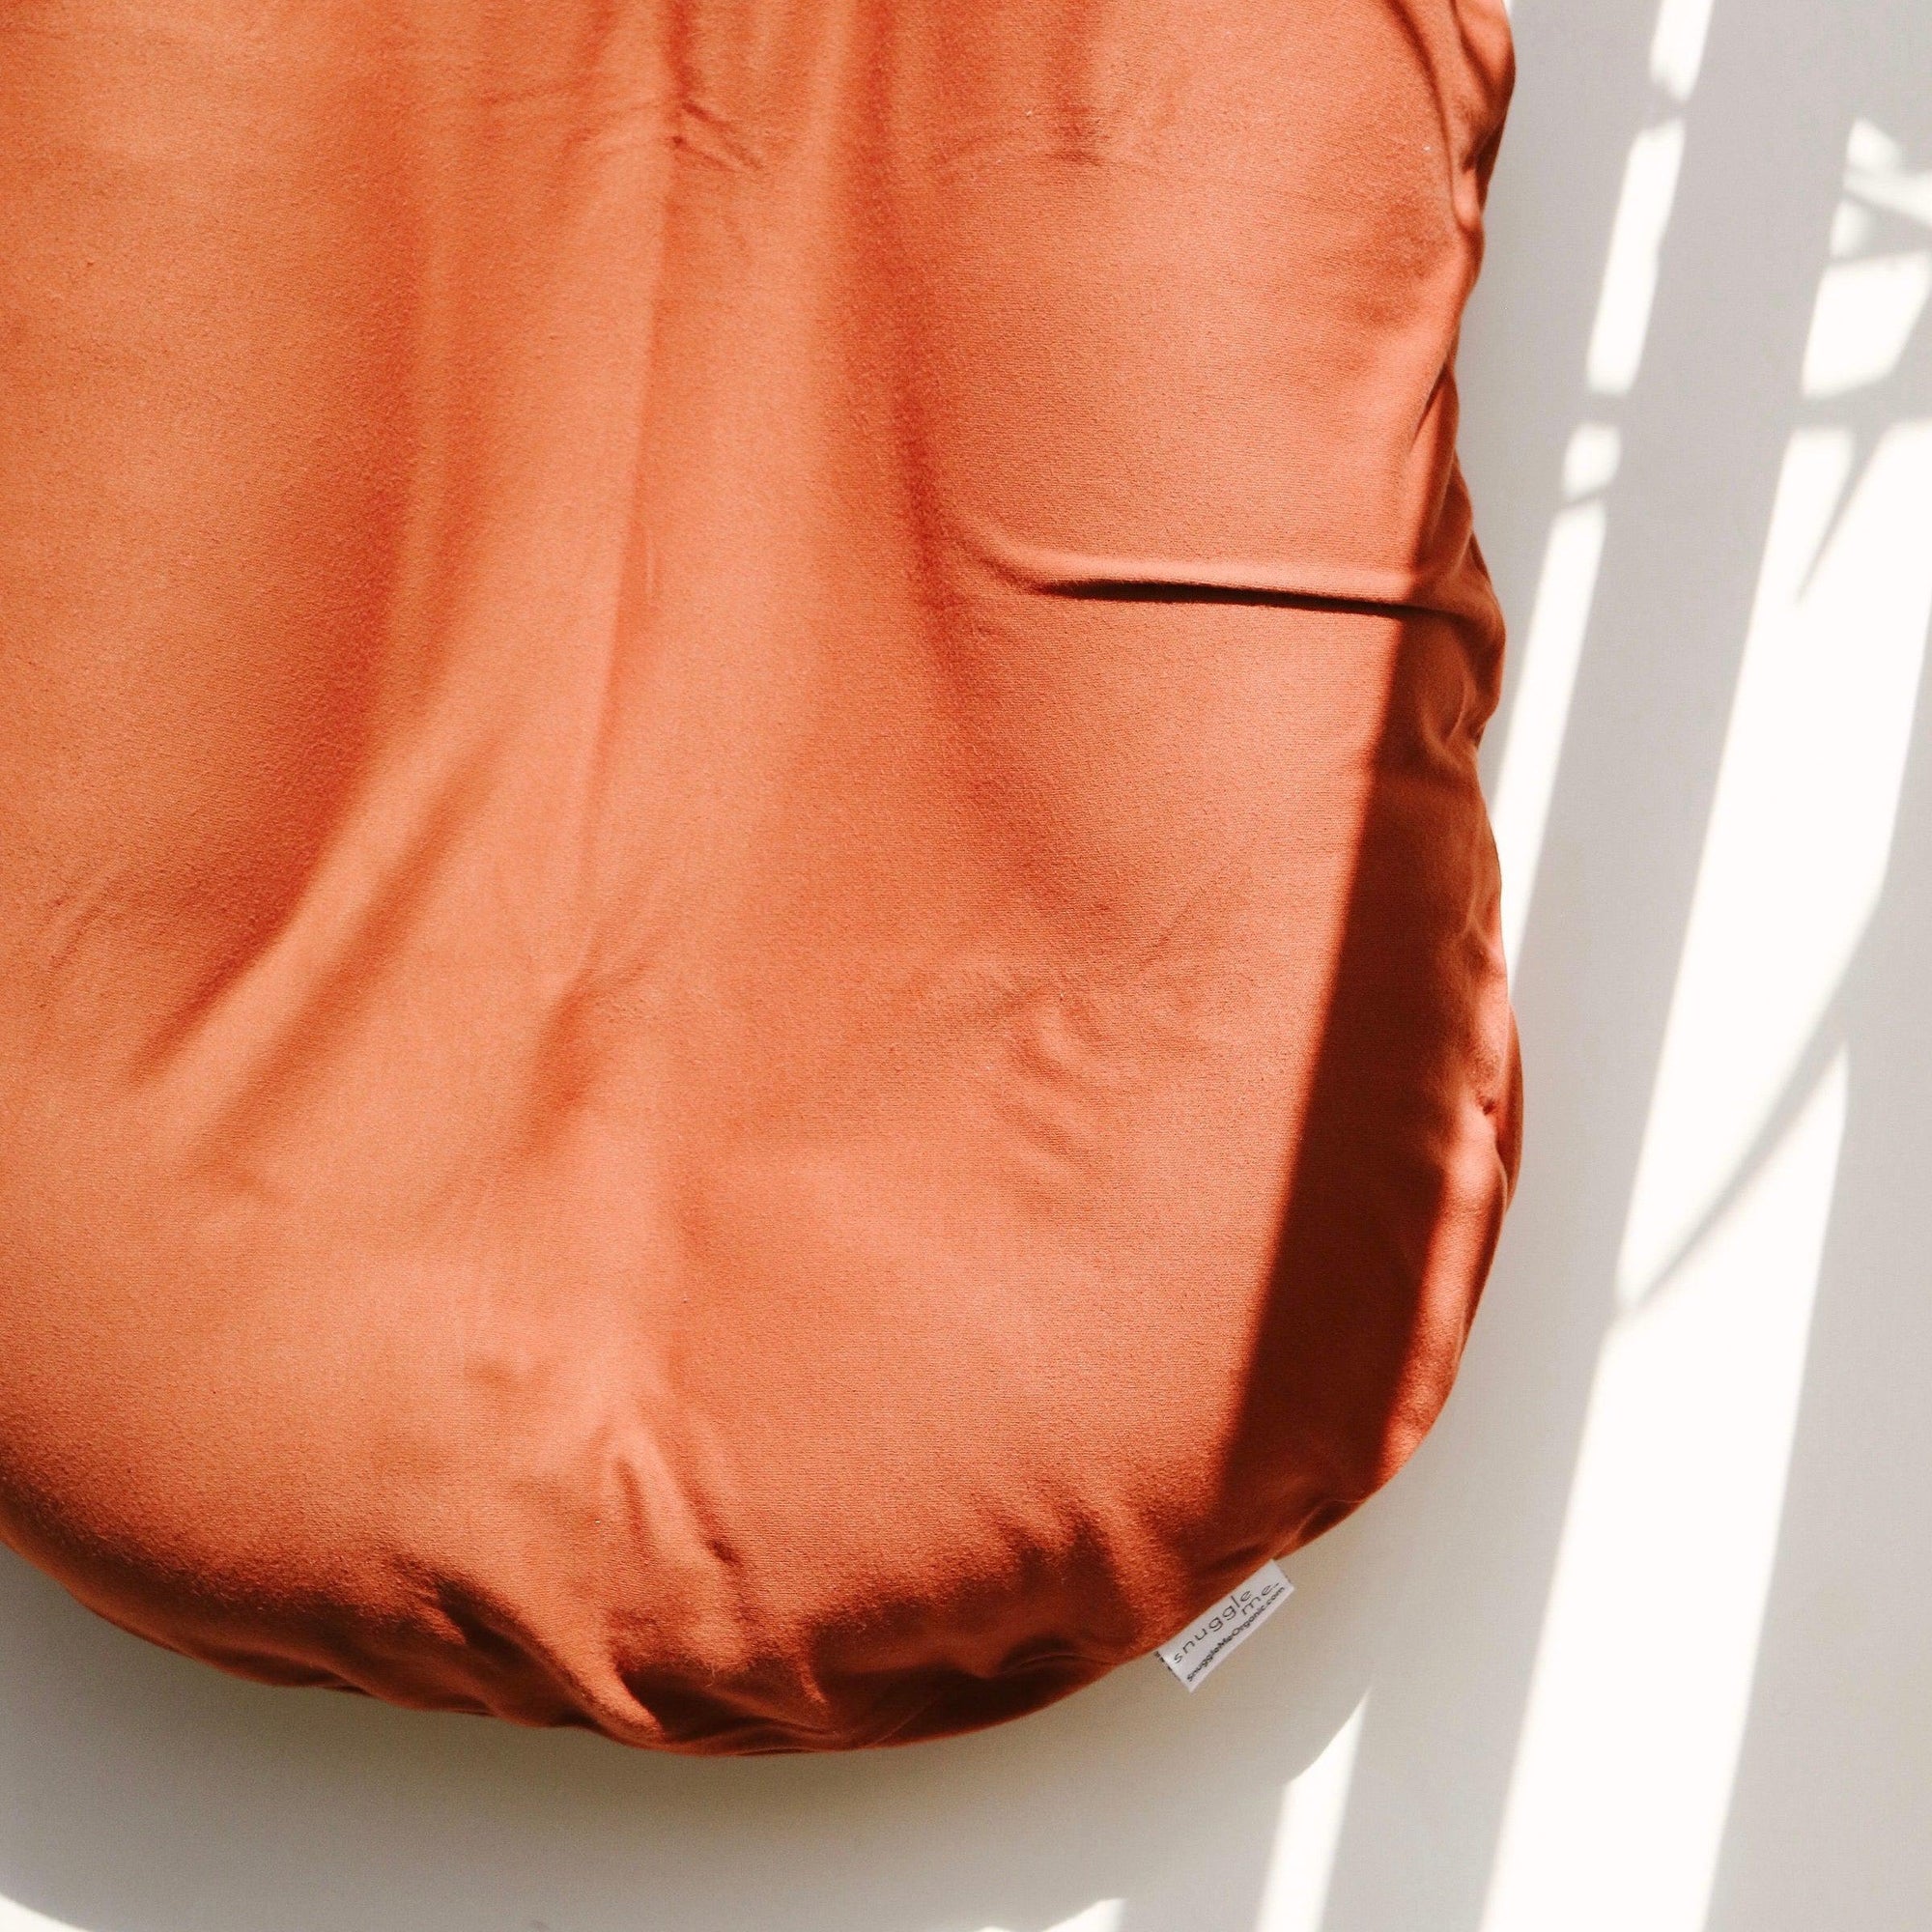 The Snuggle Me Lounger Cover in the shade Gingerbread on a white surface.